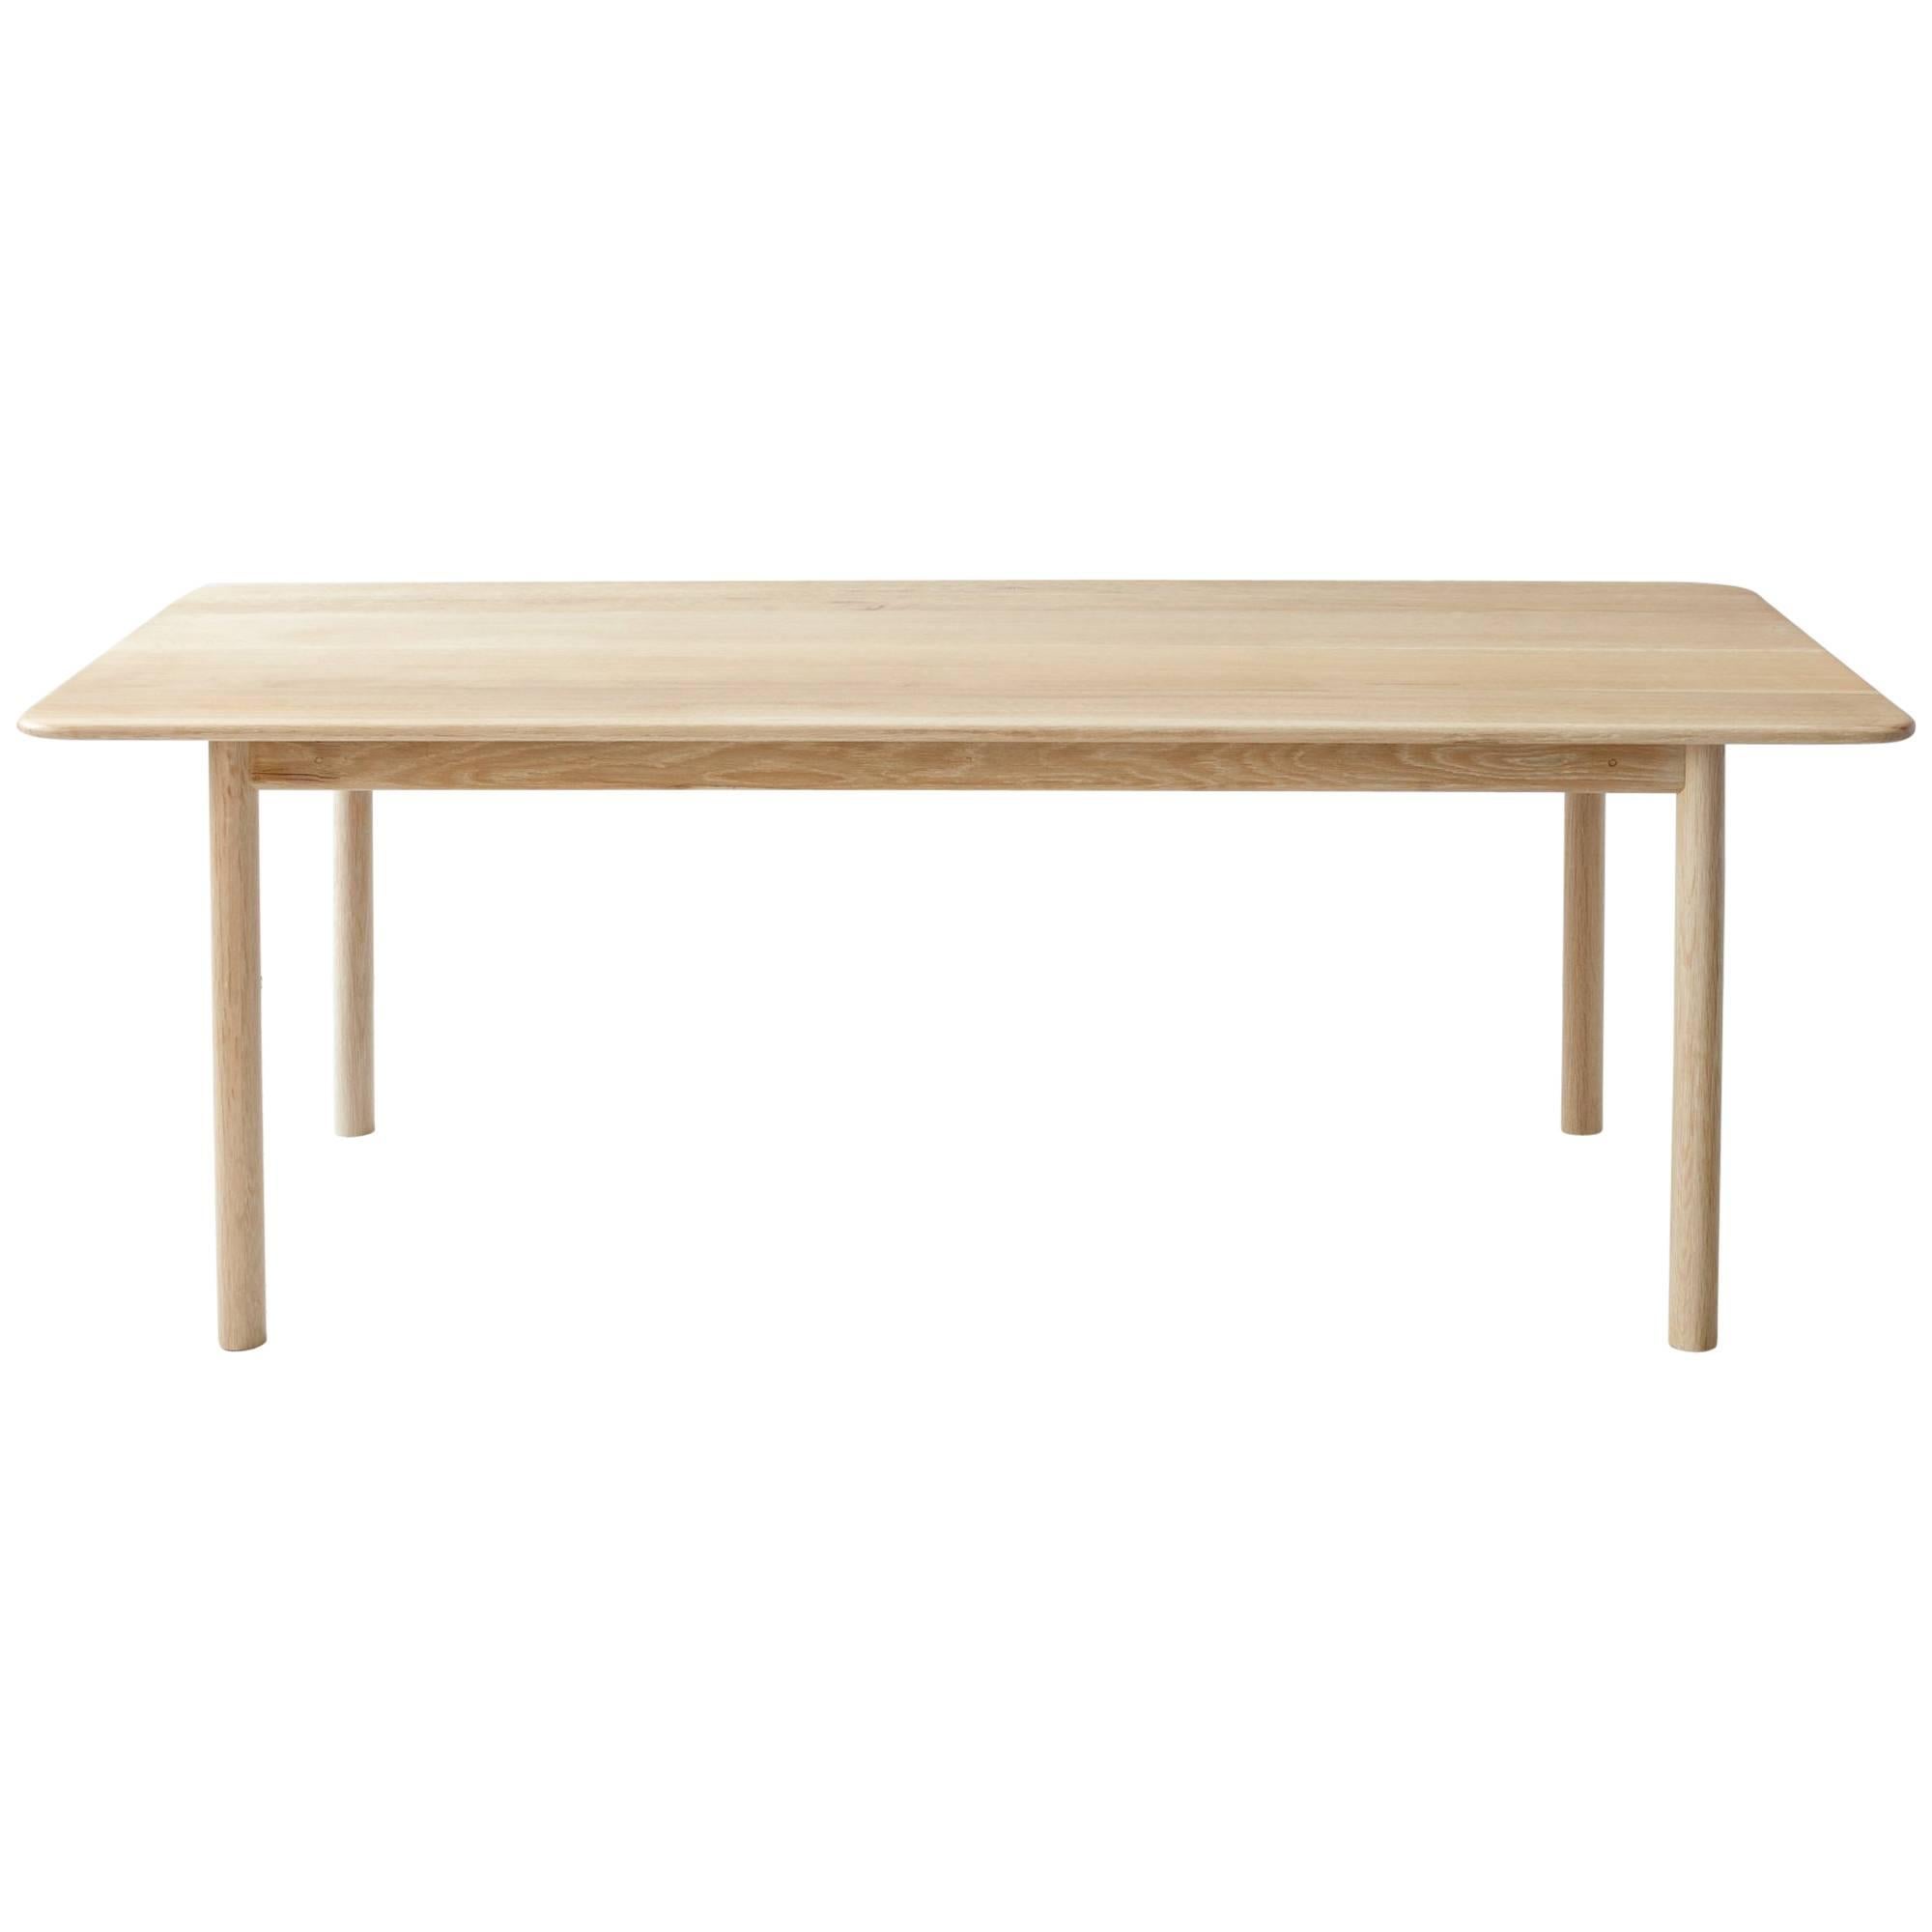 Contemporary Wood Range Table in White Oakwood by Fort Standard For Sale